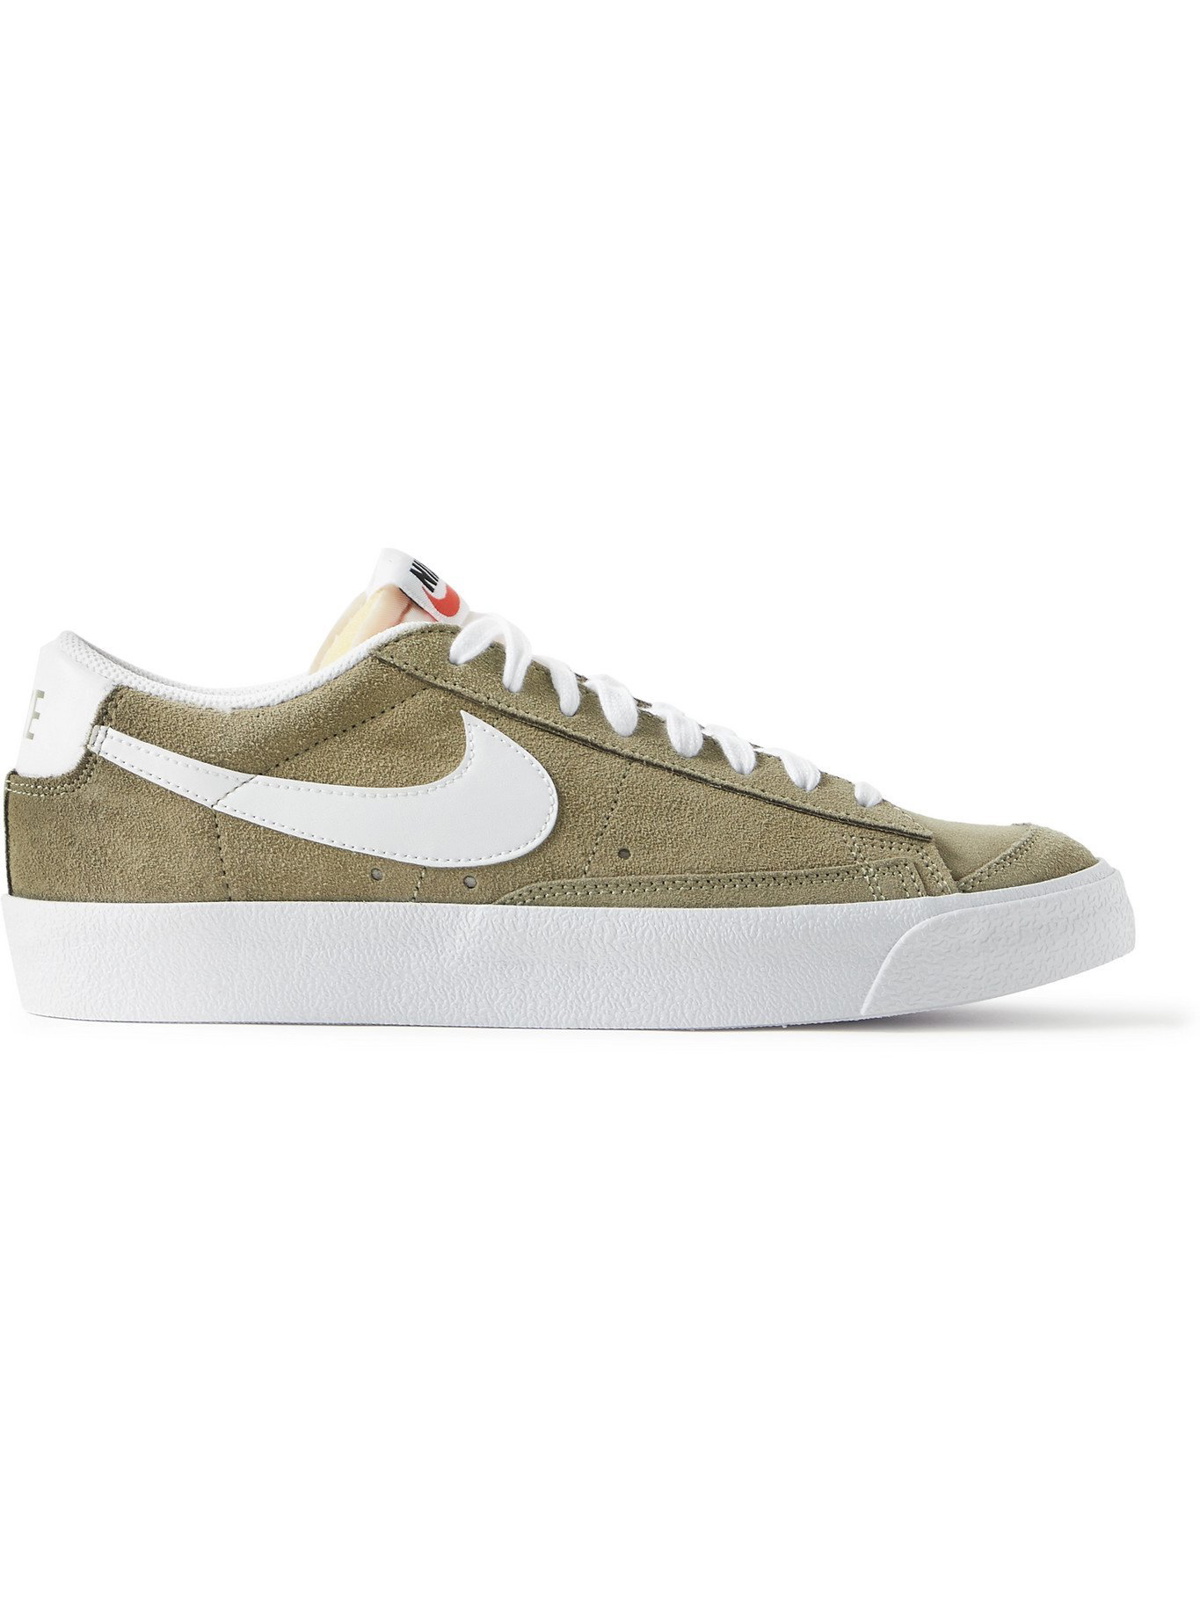 NIKE - Blazer '77 Leather-Trimmed Suede Sneakers - Green Nike